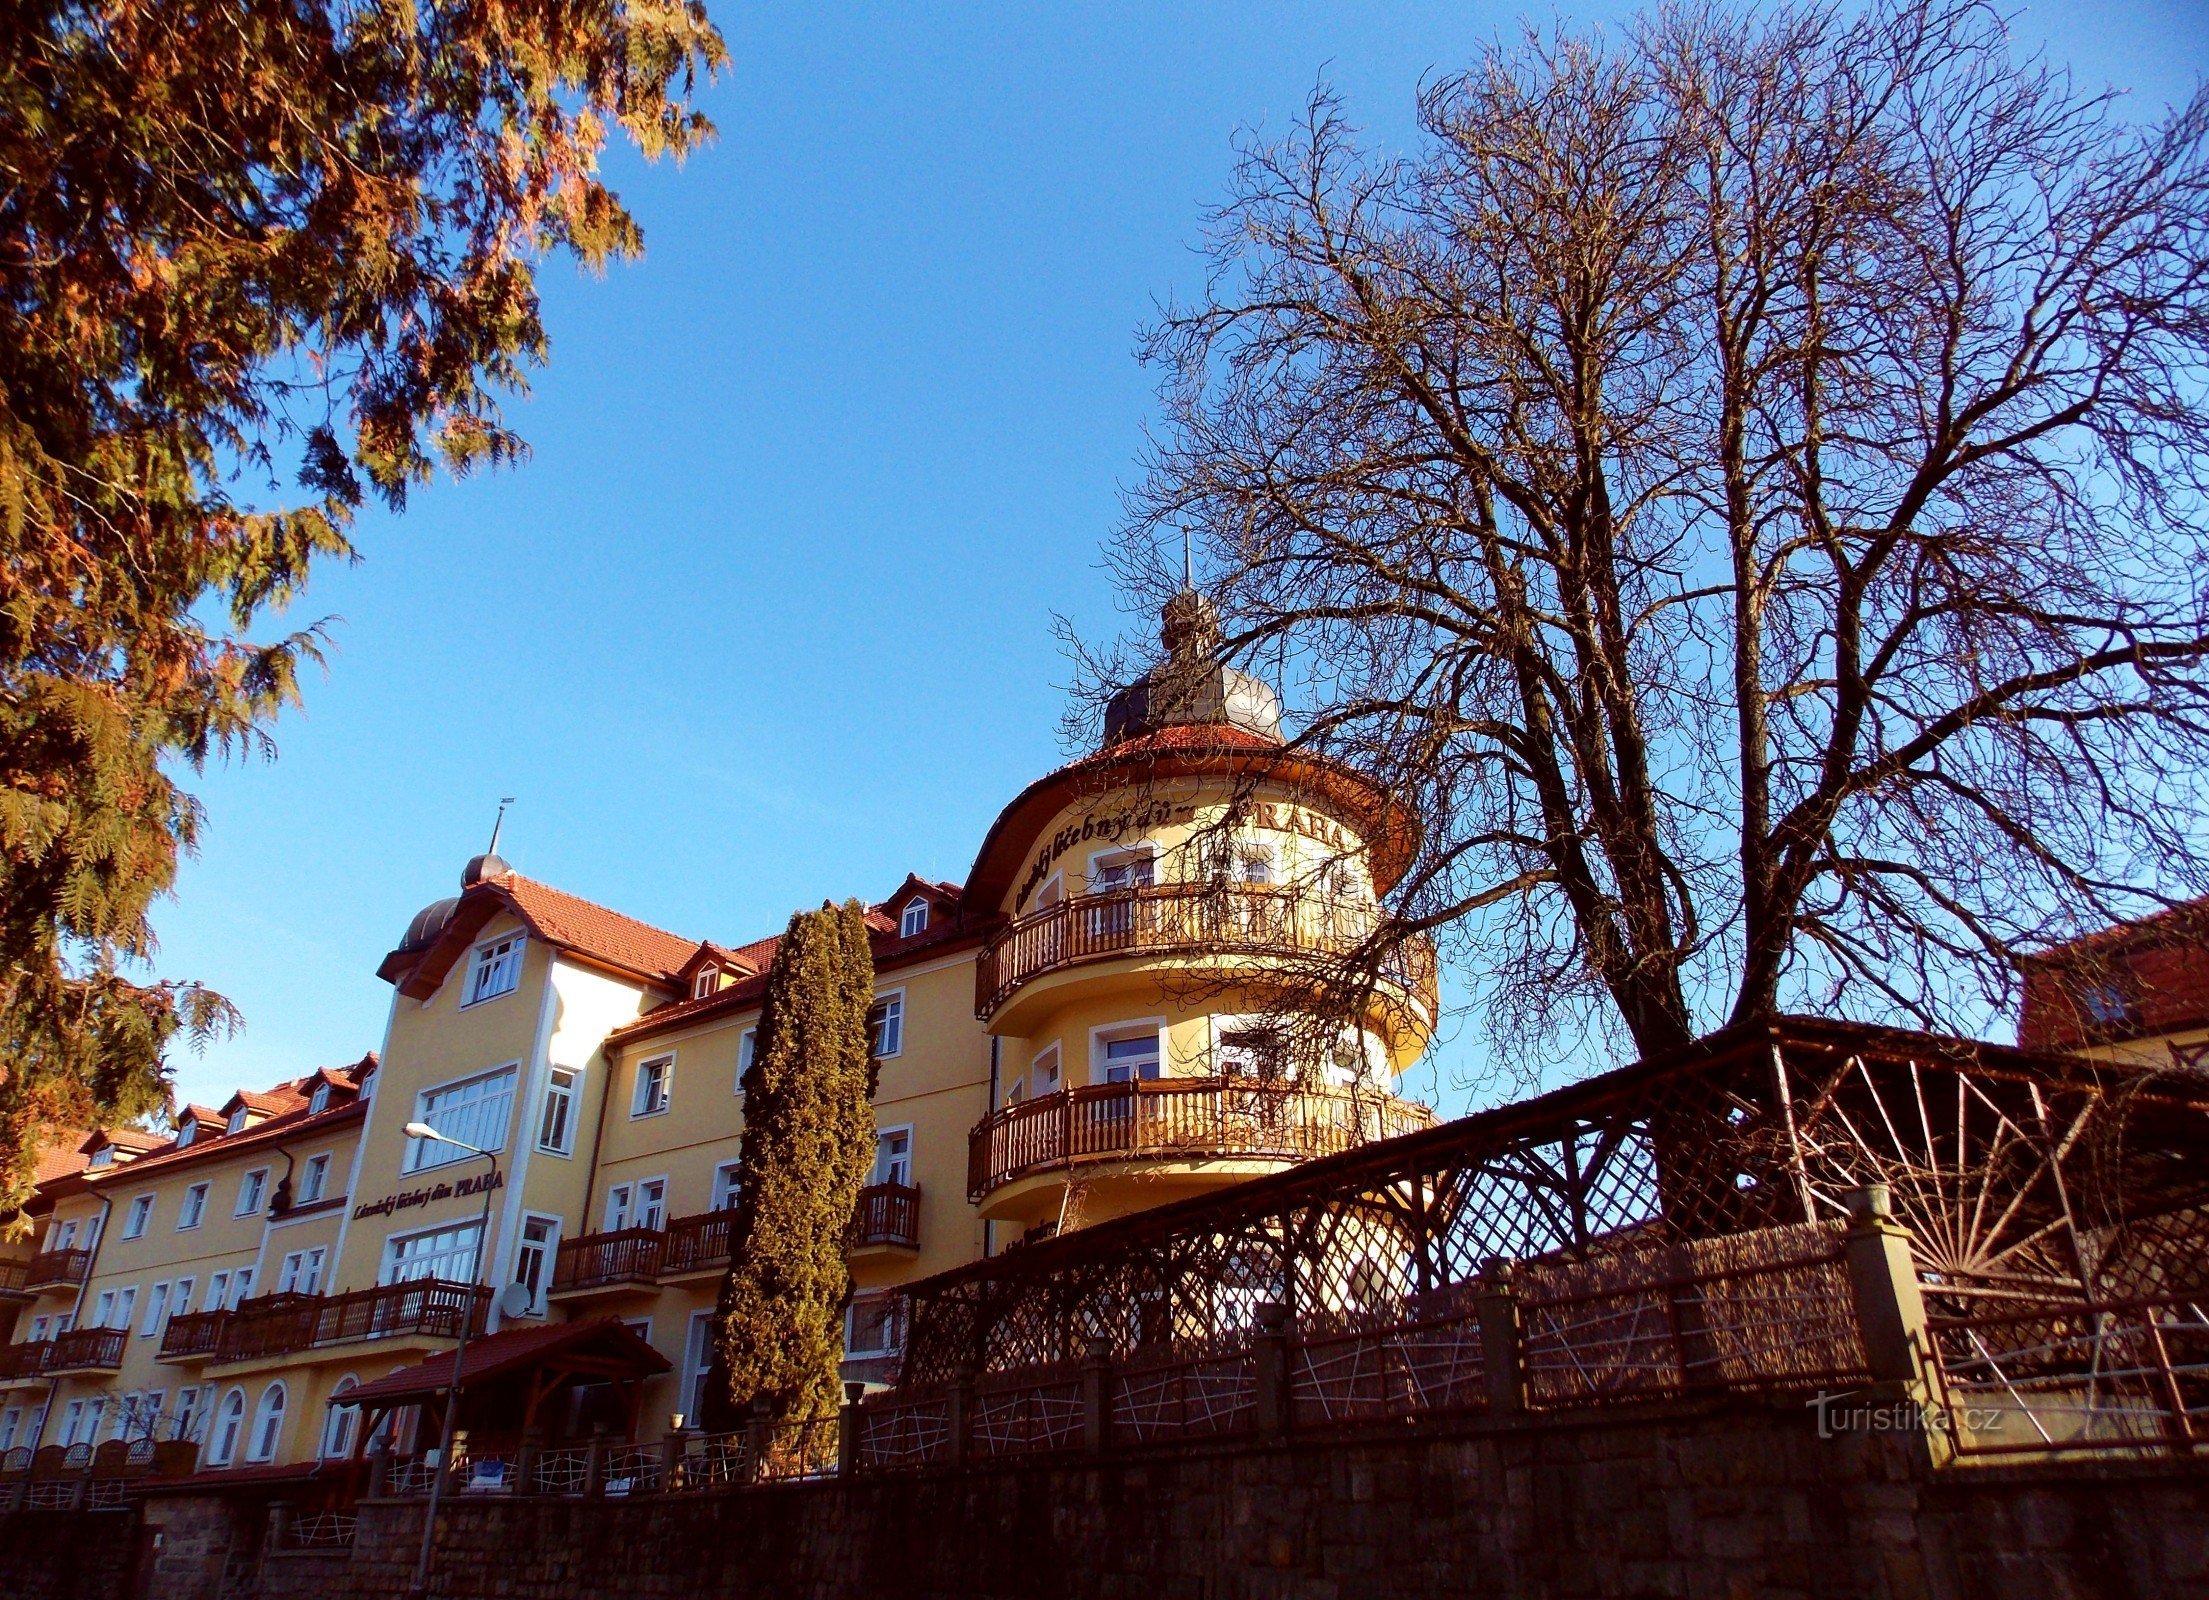 Accommodation in the Prague Spa and Treatment House in Luhačovice